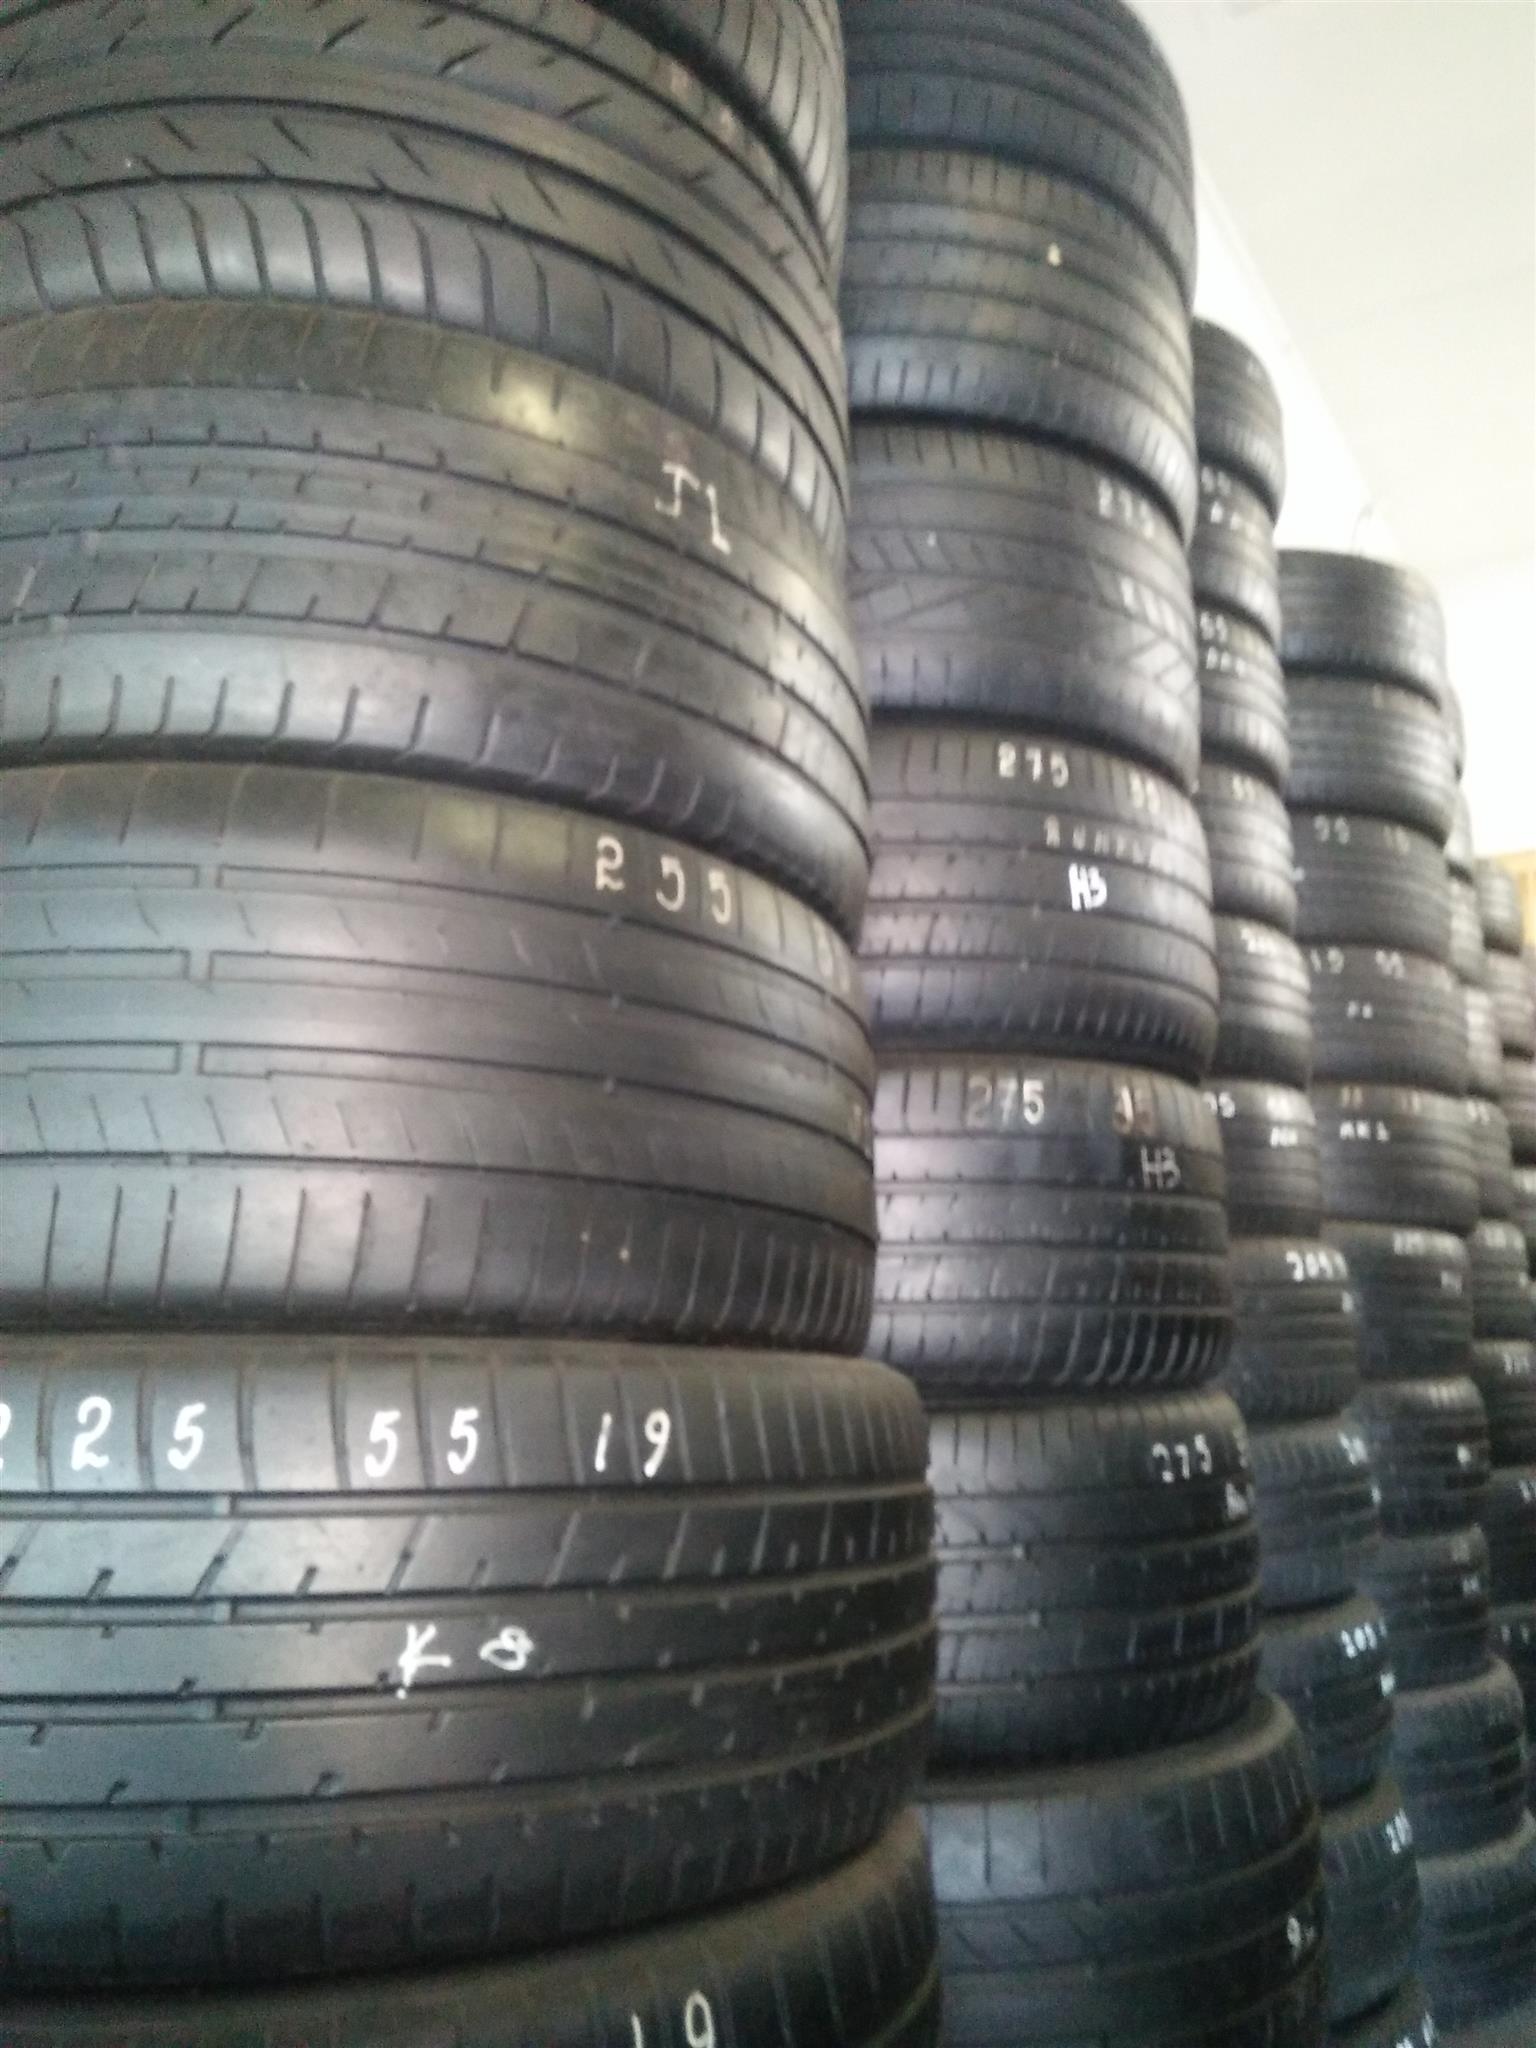 Cm Used car second hand tyre shop